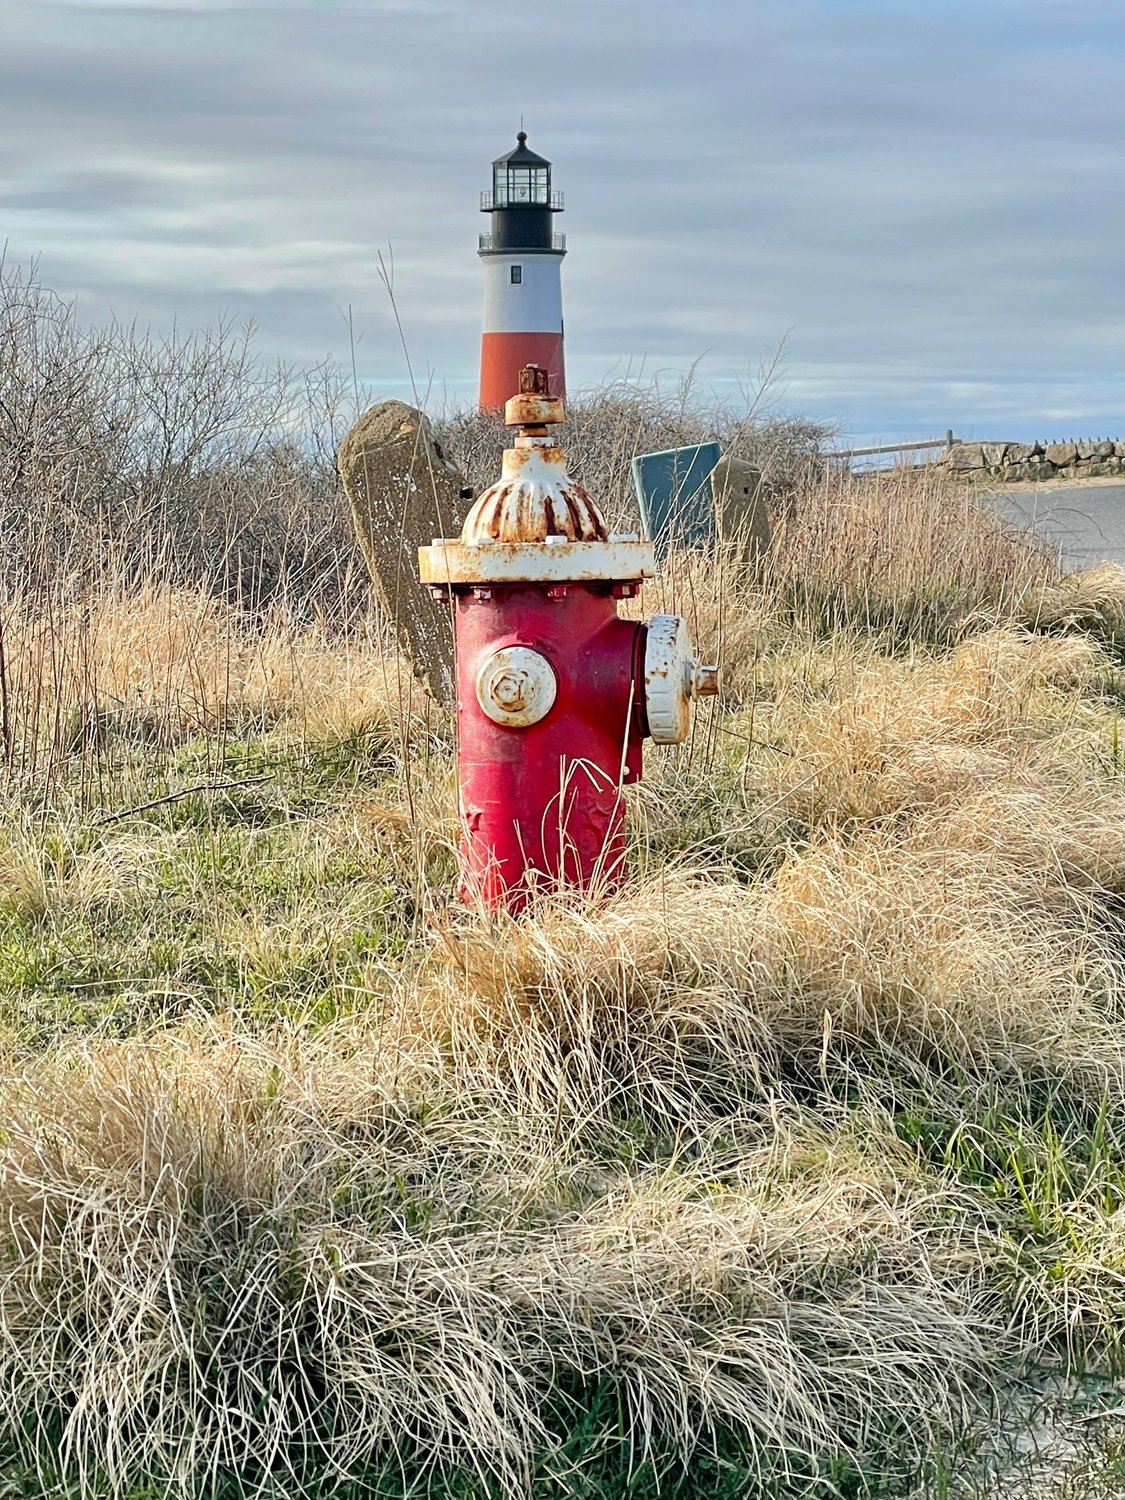 Sankaty Head Light with a fire hydrant in the foreground.